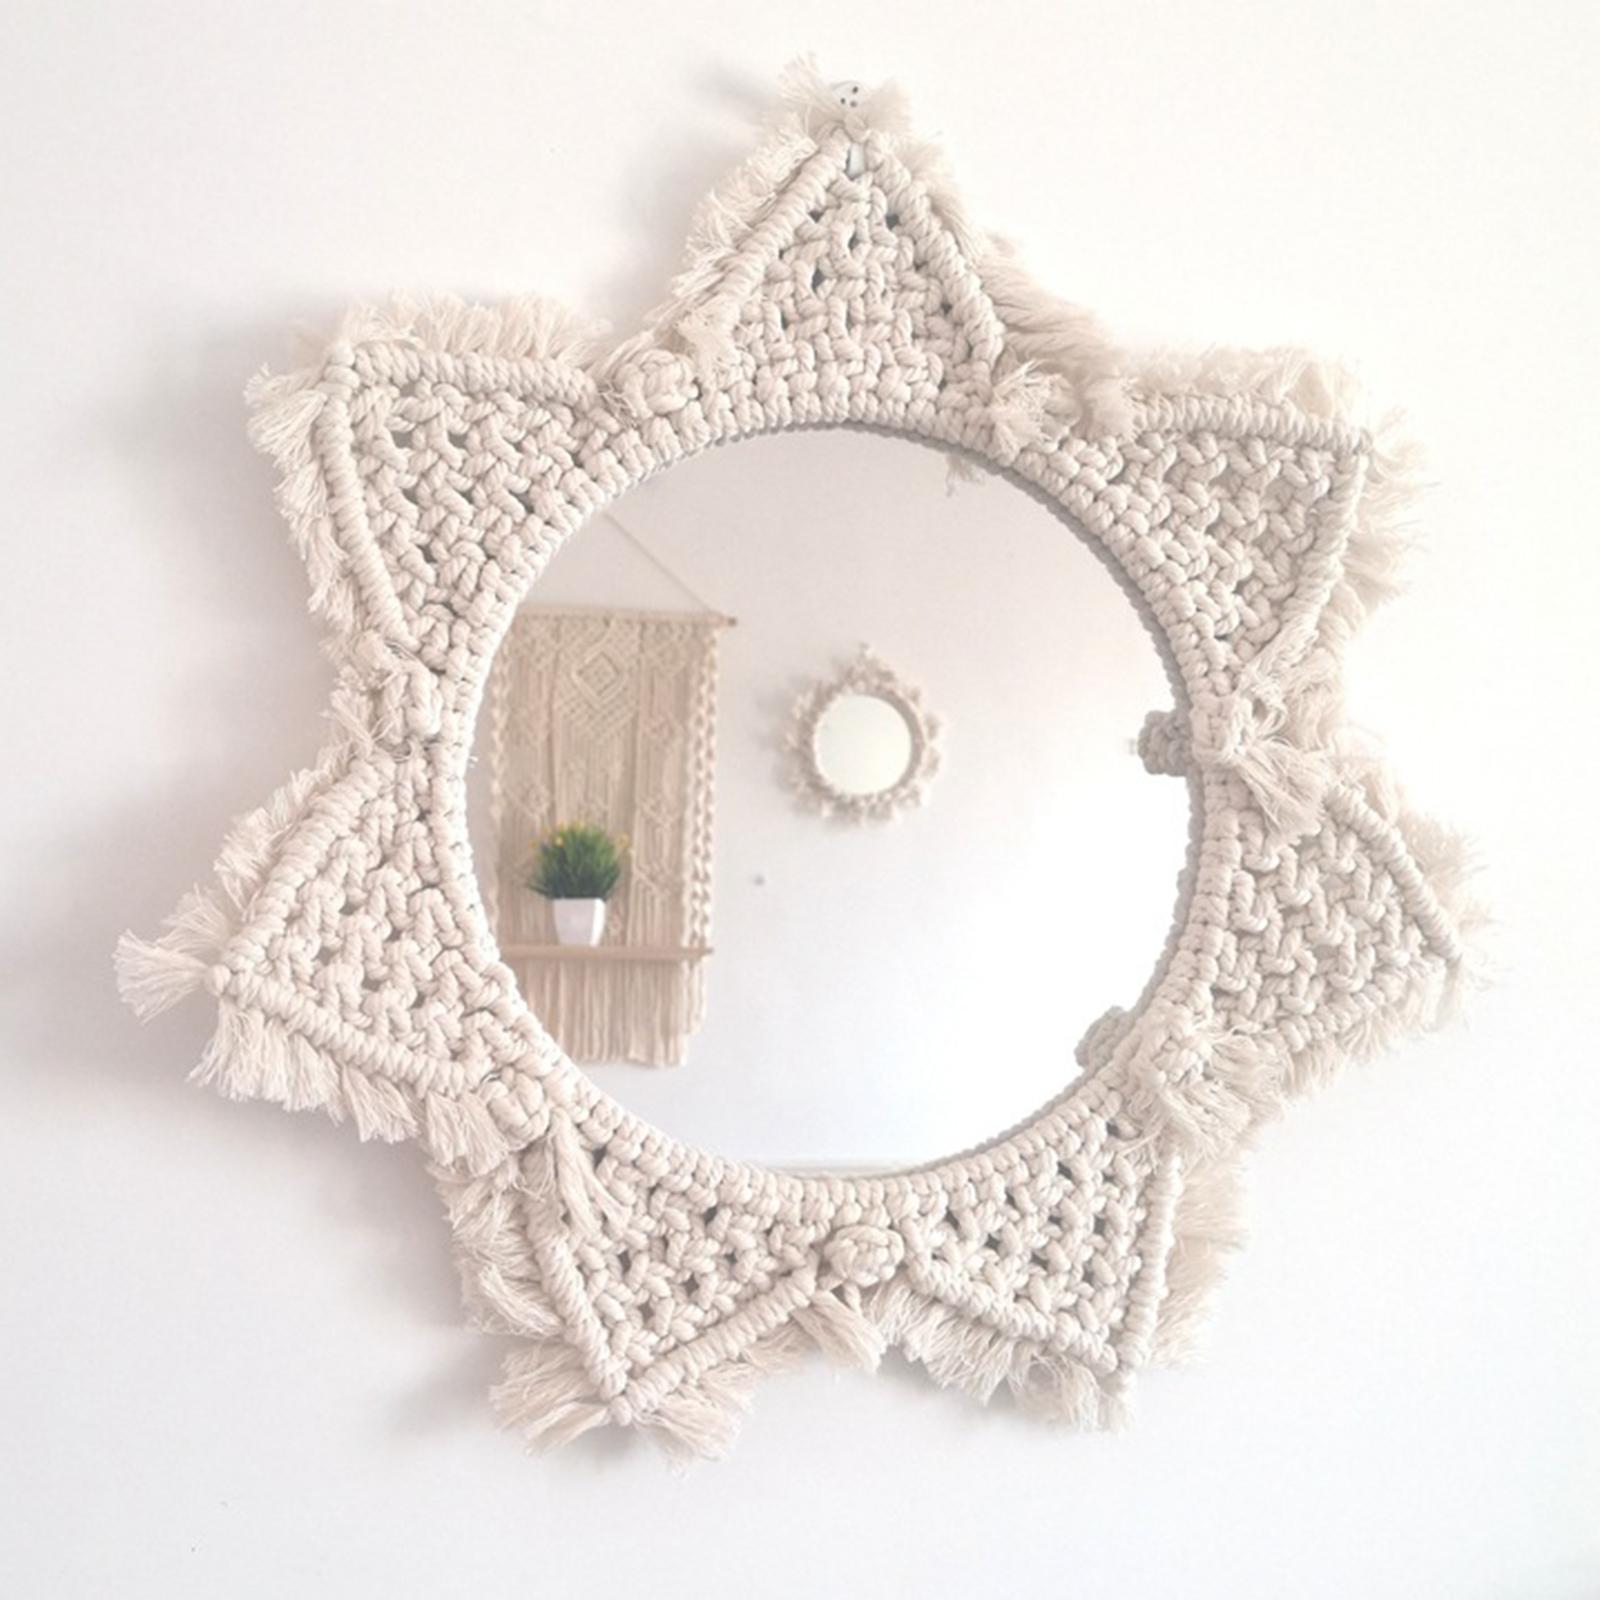 Hanging Wall Mirror Macrame Fringe Mirror Decor for Living Room Bedroom A